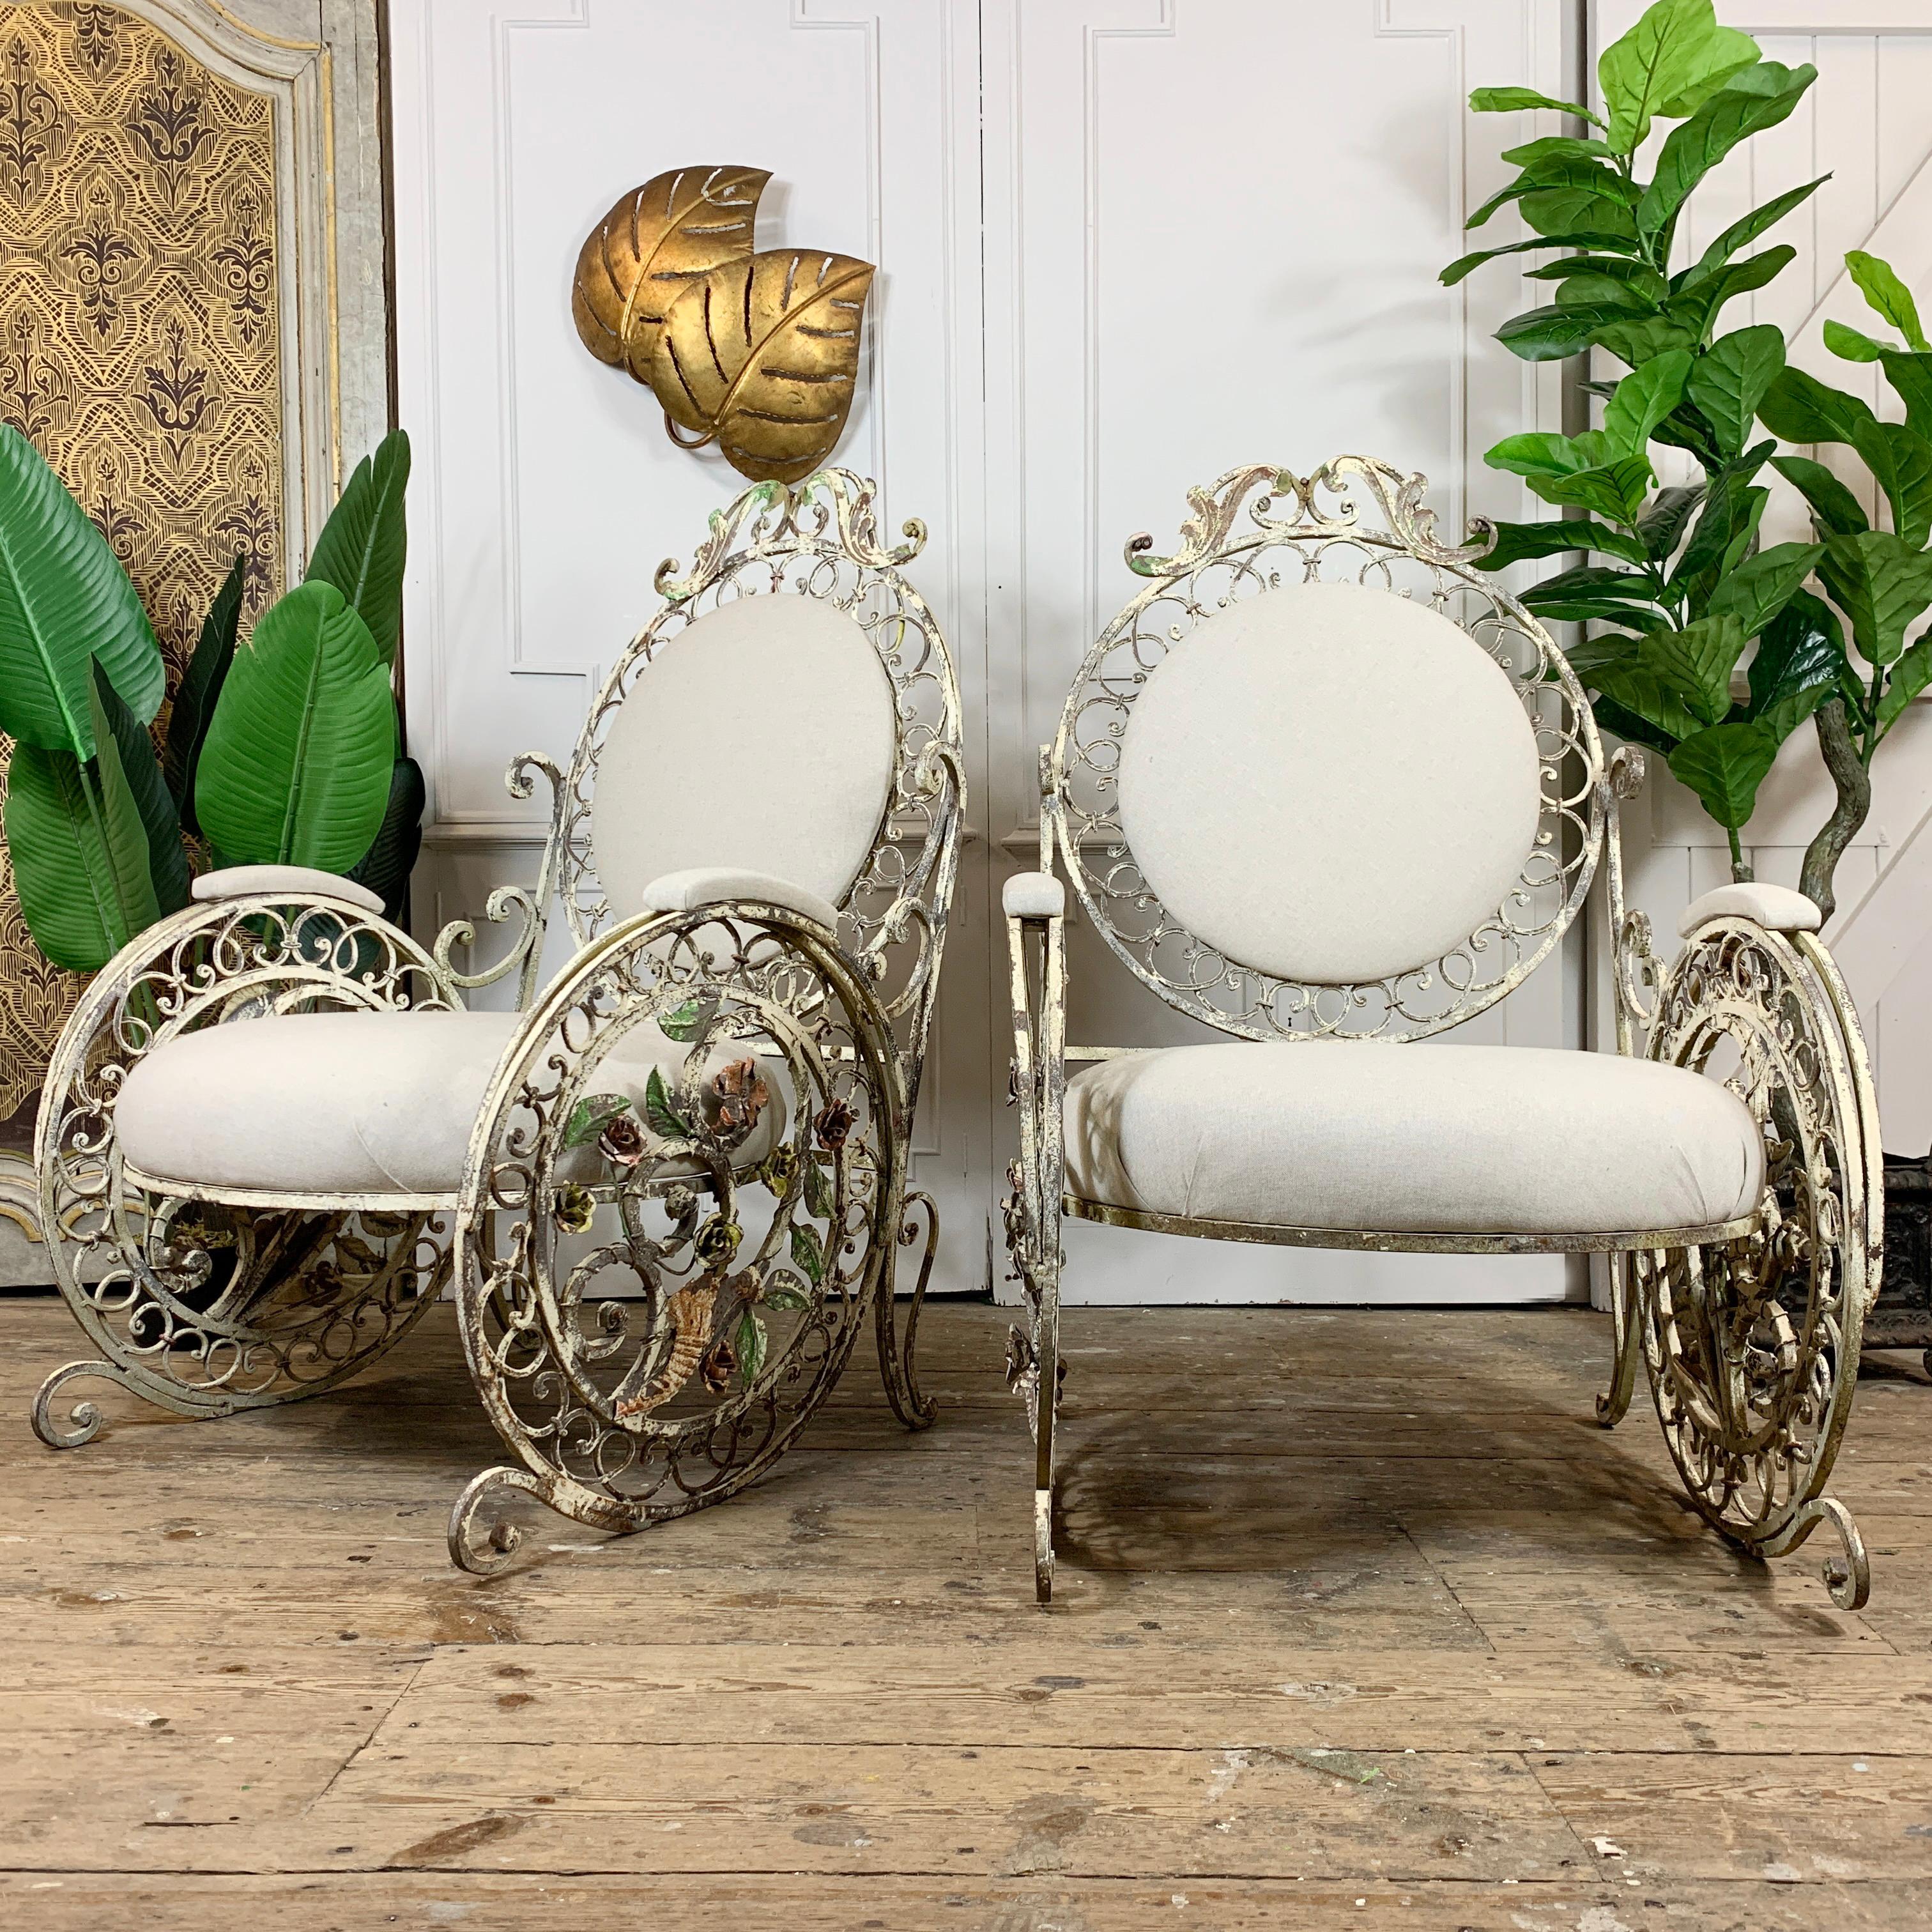 A quite exceptional late 19th century pair of French patio/orangery chairs.

This is a beautiful wrought iron pair of large chairs, with the most intricate decorative detailing and workmanship throughout. An abundance of flowers and leaves